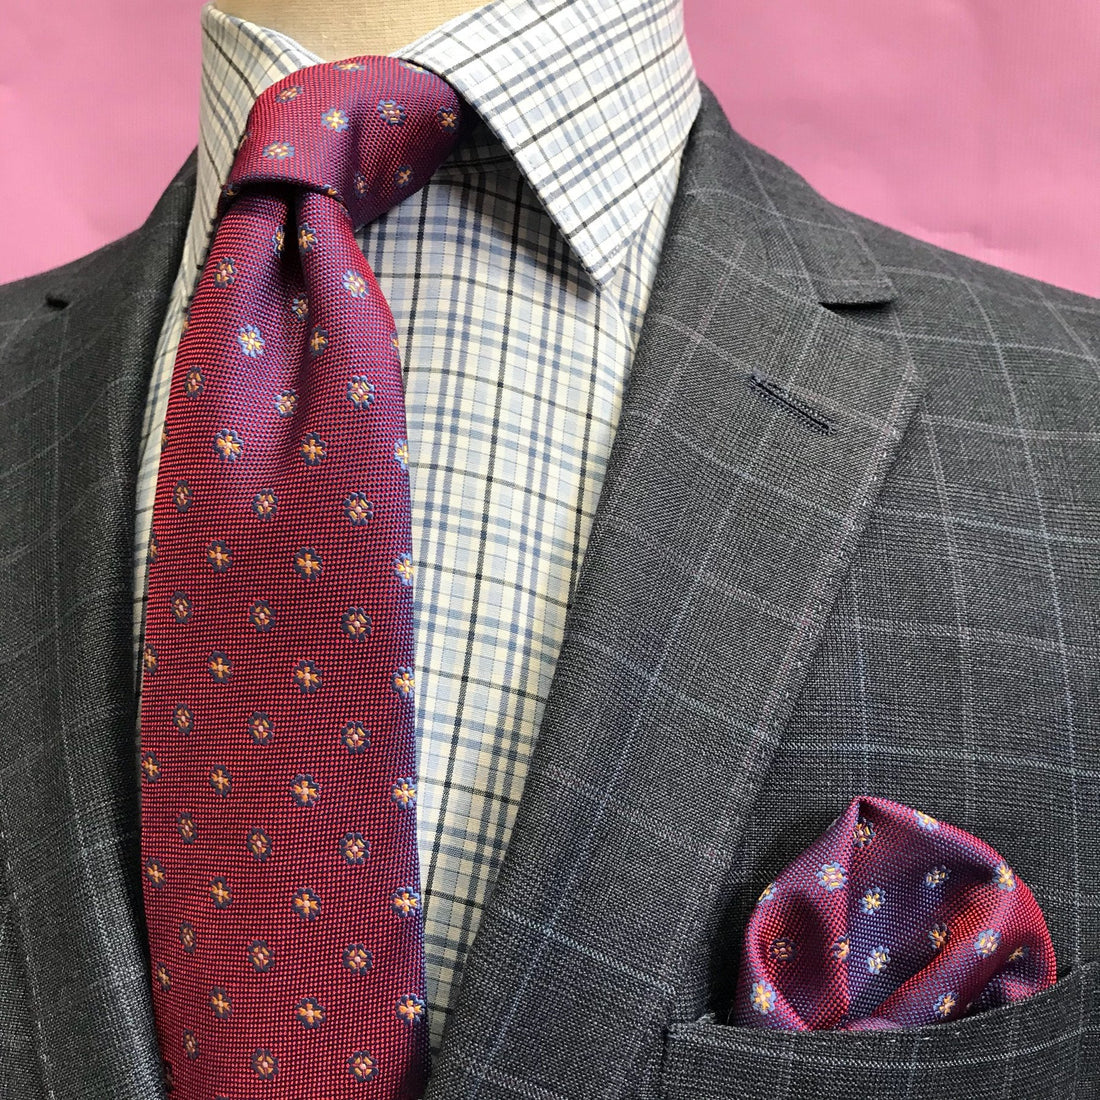 the james adelin window pane check business shirt under a grey jacket